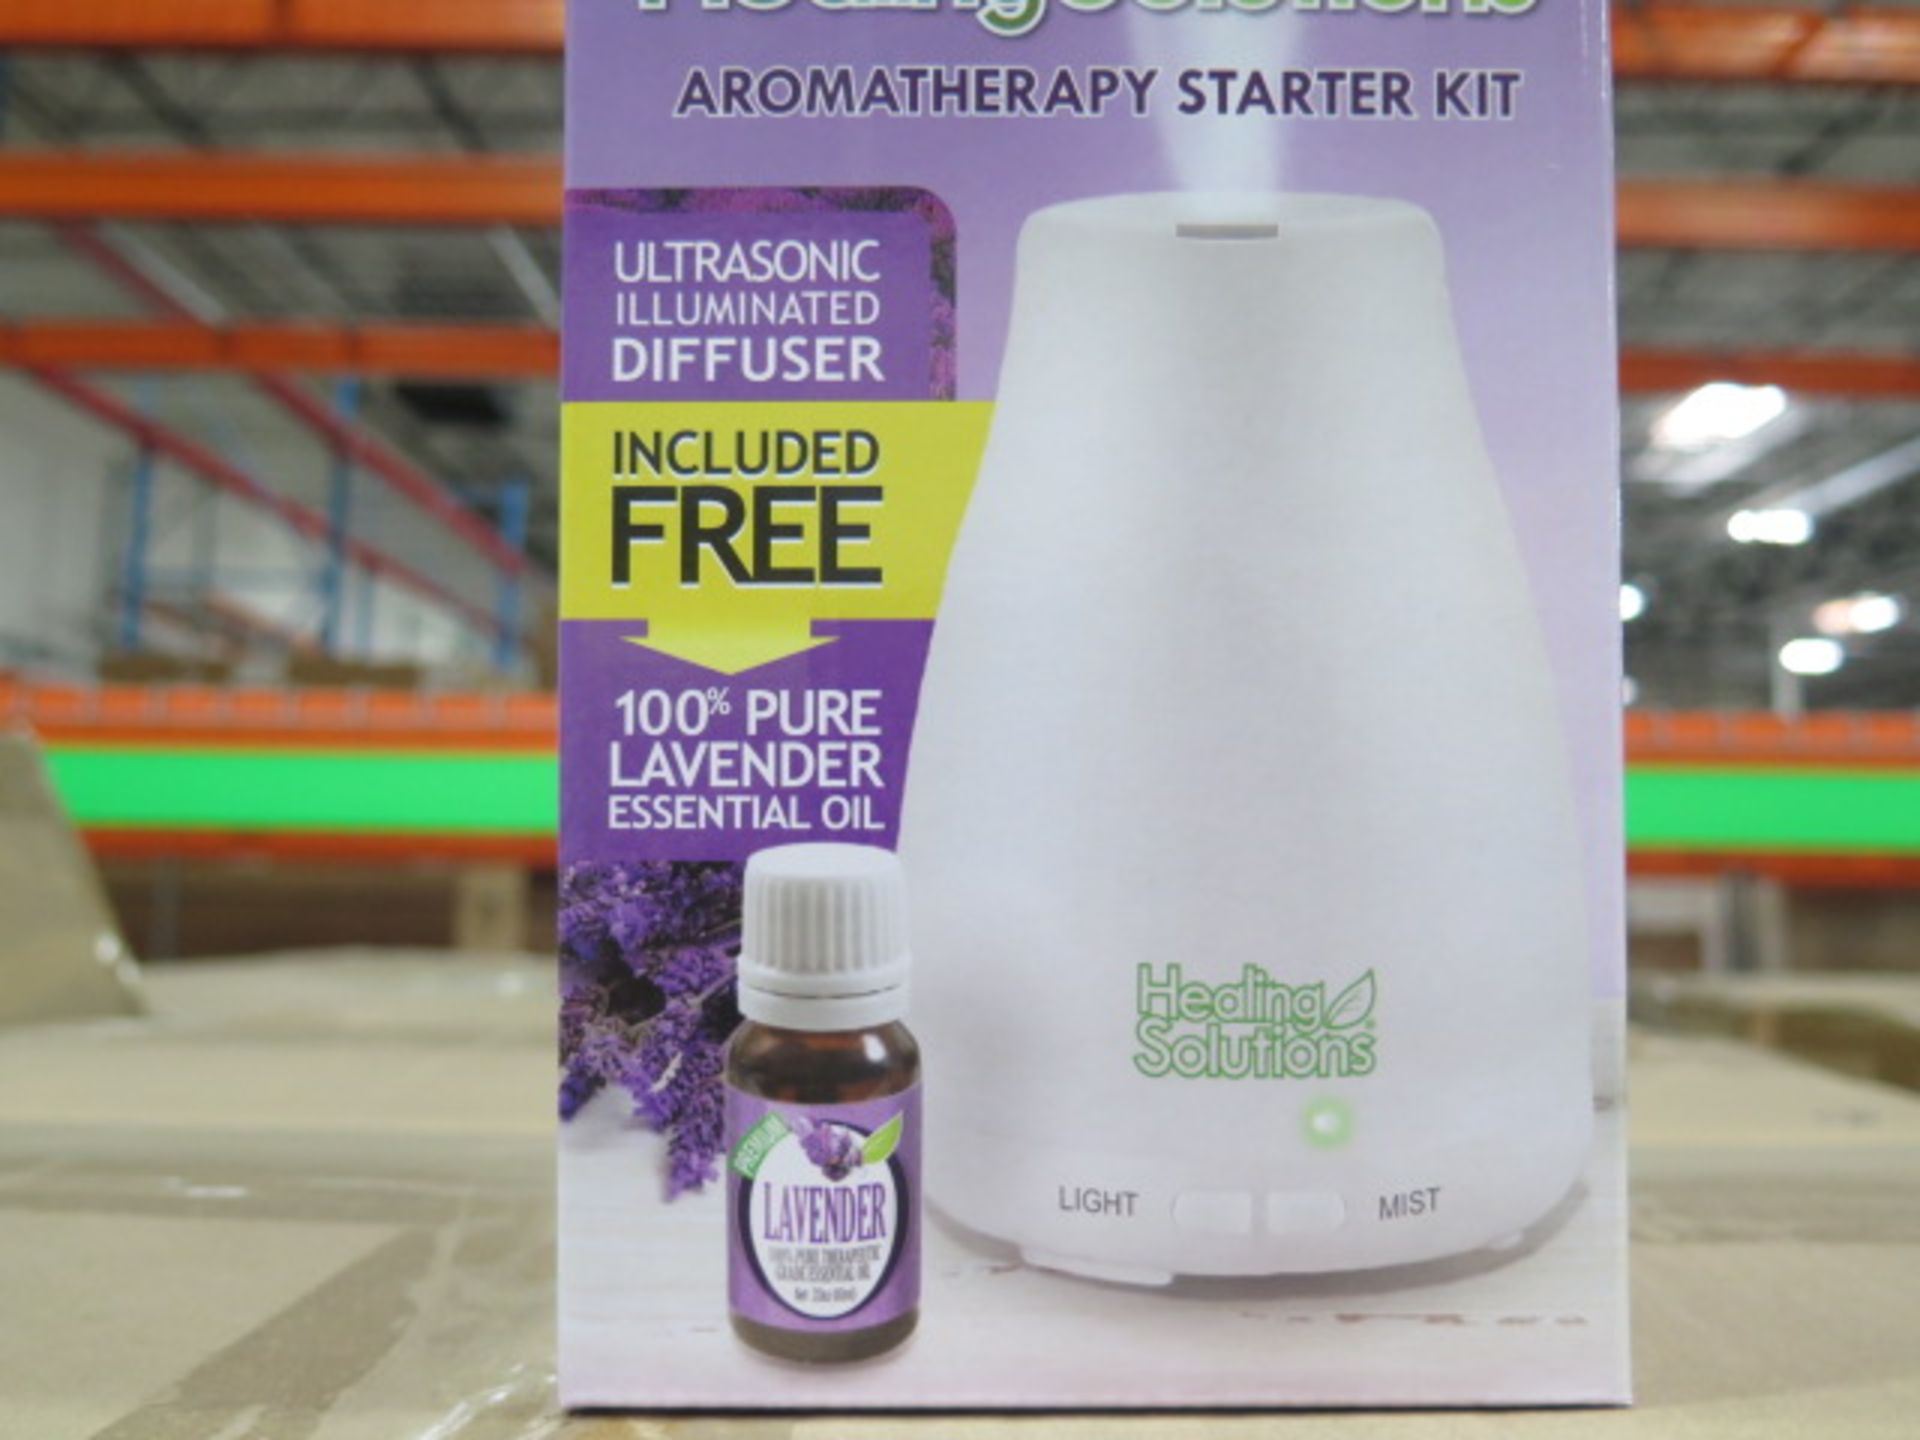 Aromatheropy Ultrasonic Illuminated Diffusers (420-NEW STOCK) (SOLD AS-IS - NO WARRANTY) - Image 5 of 5